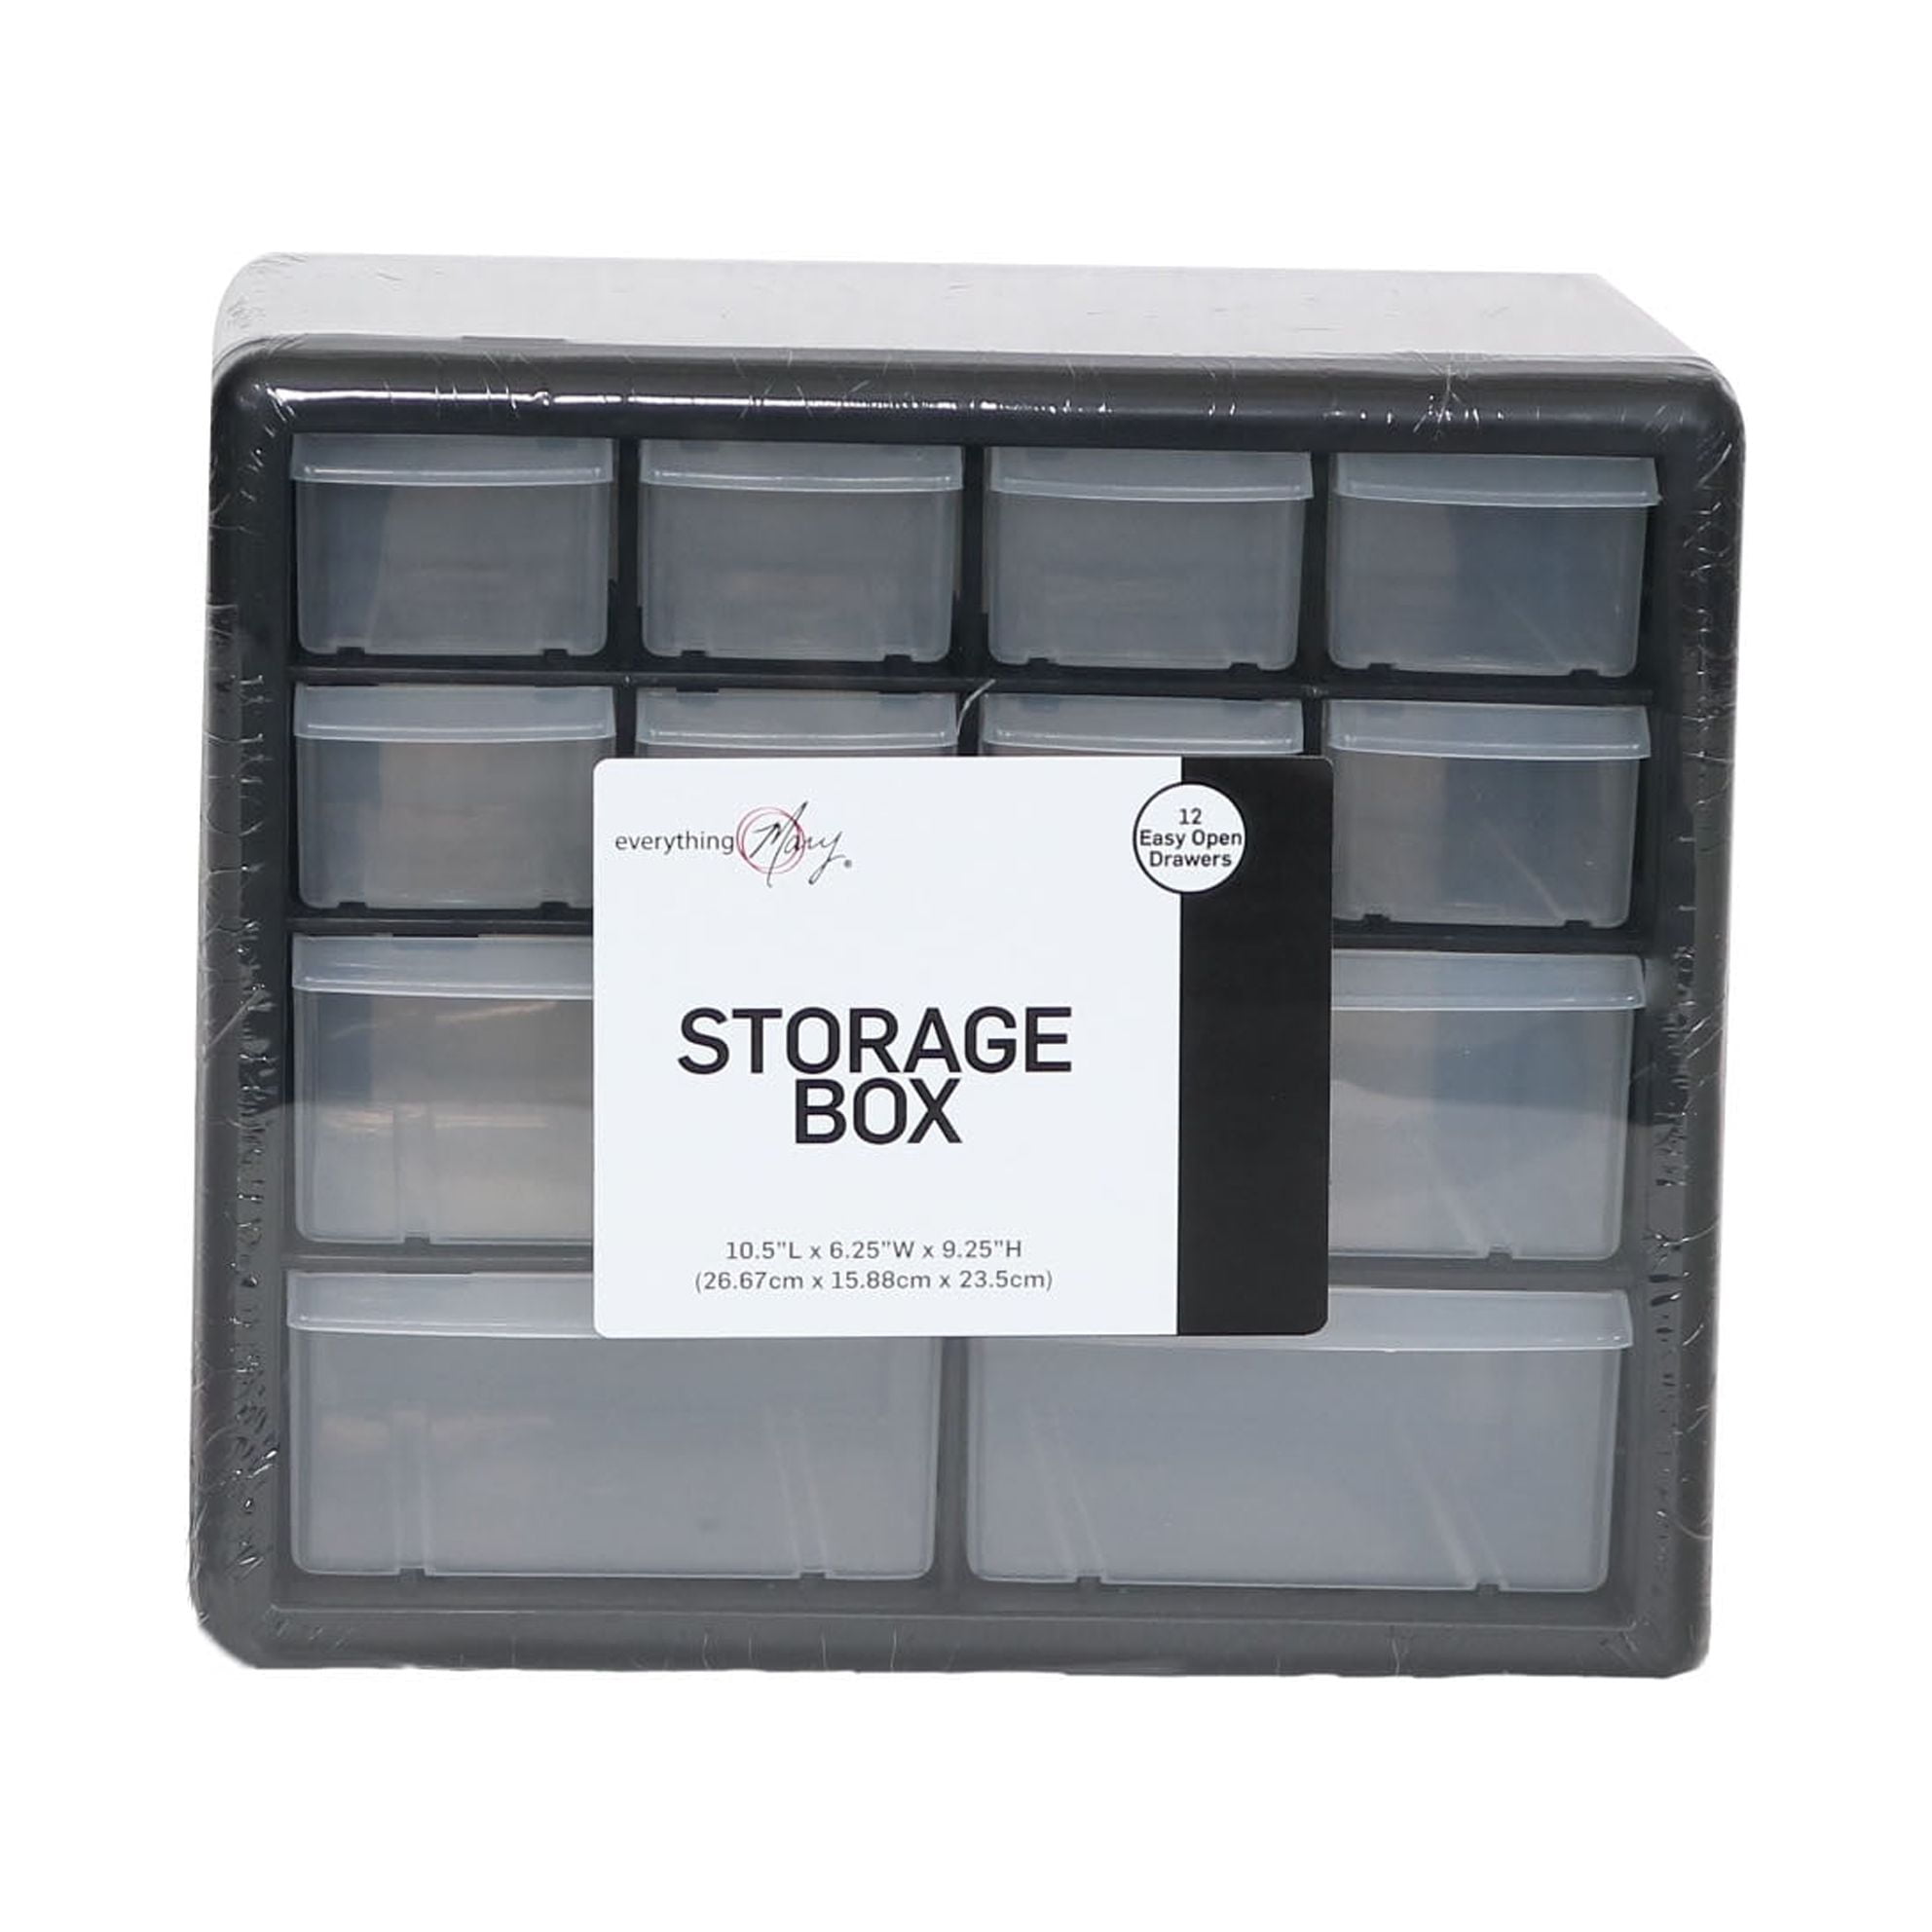 12 Pack: Black Photo Storage Box by Simply Tidy™